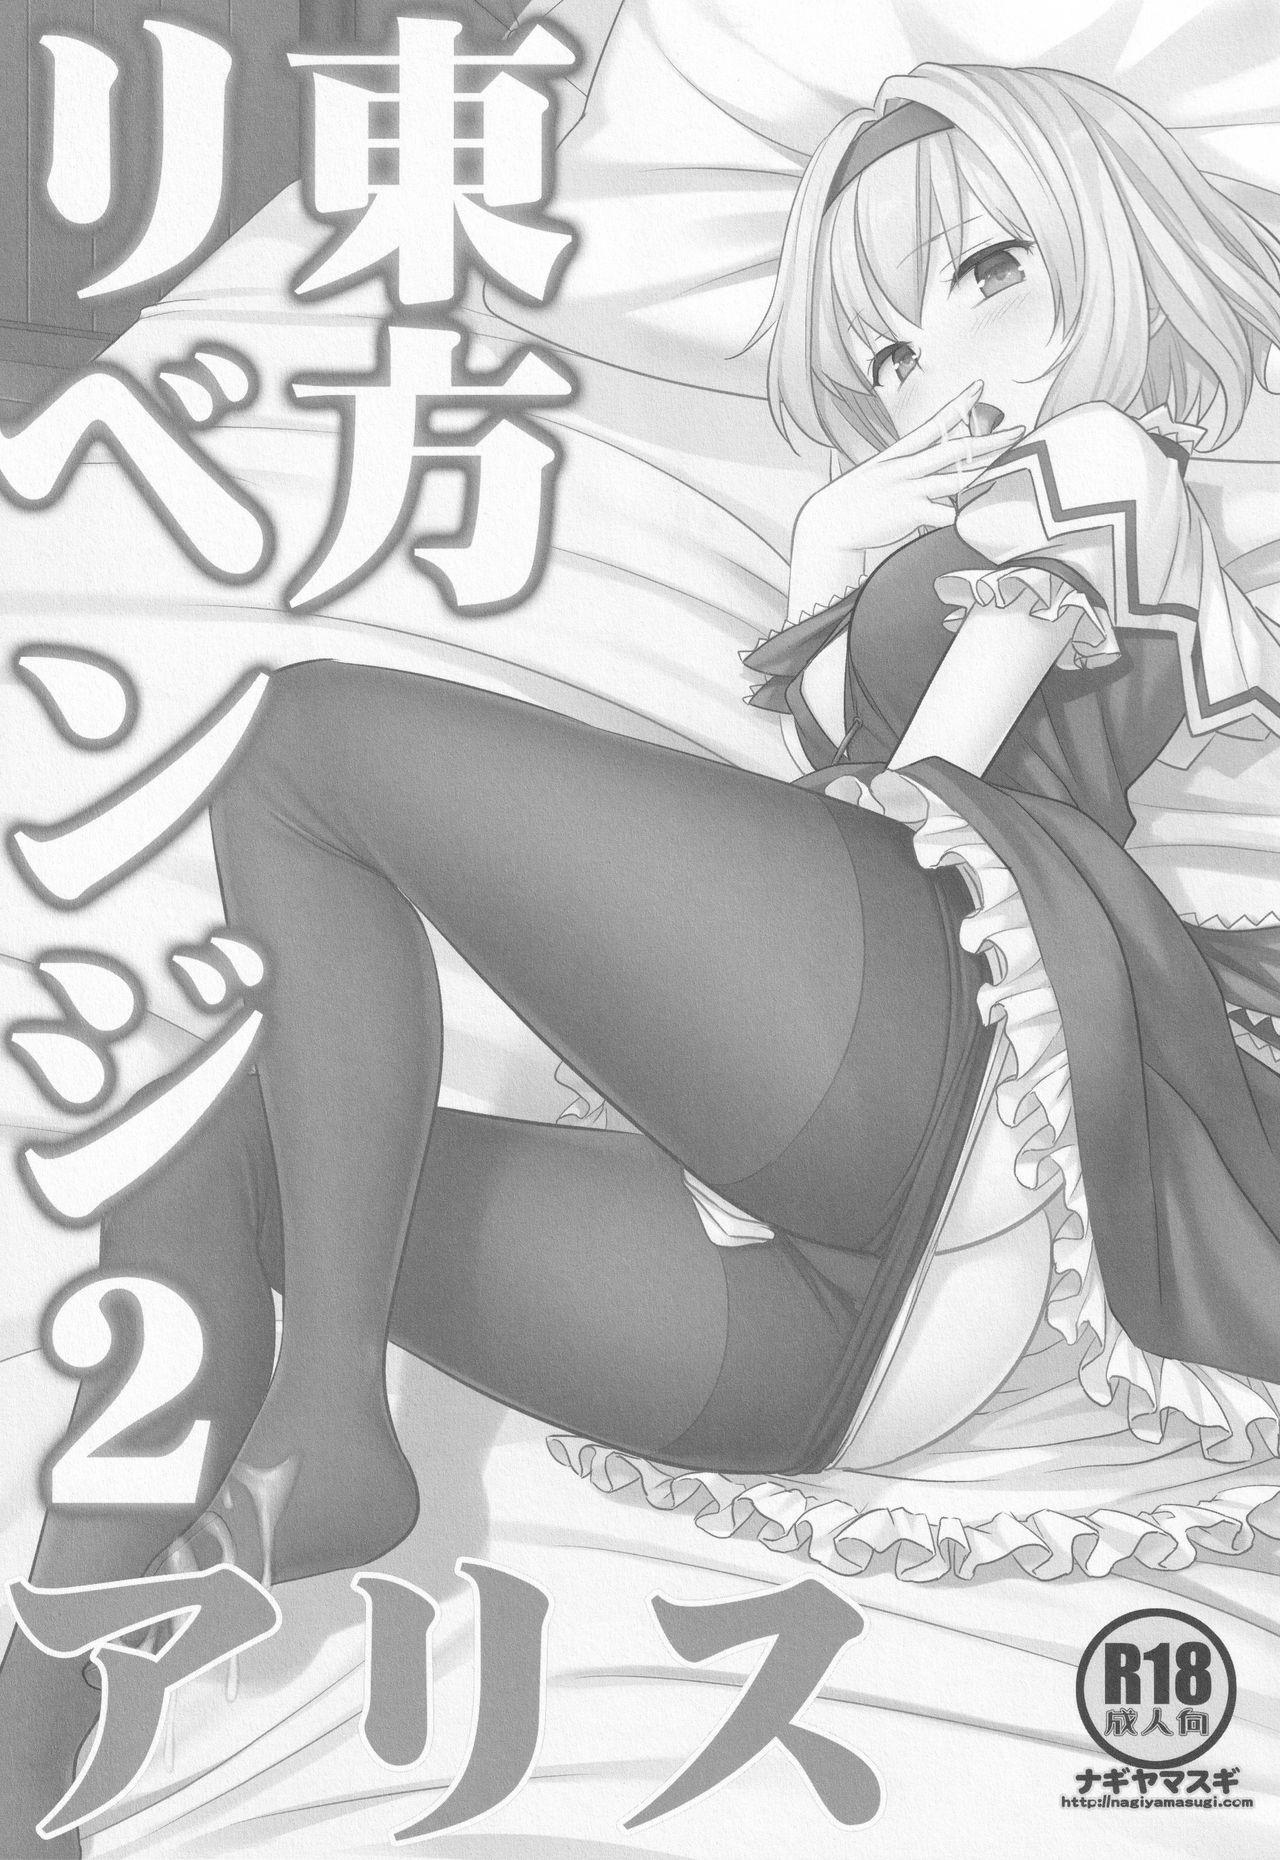 Exhibitionist Touhou Revenge 2 Alice - Touhou project Hot - Page 2